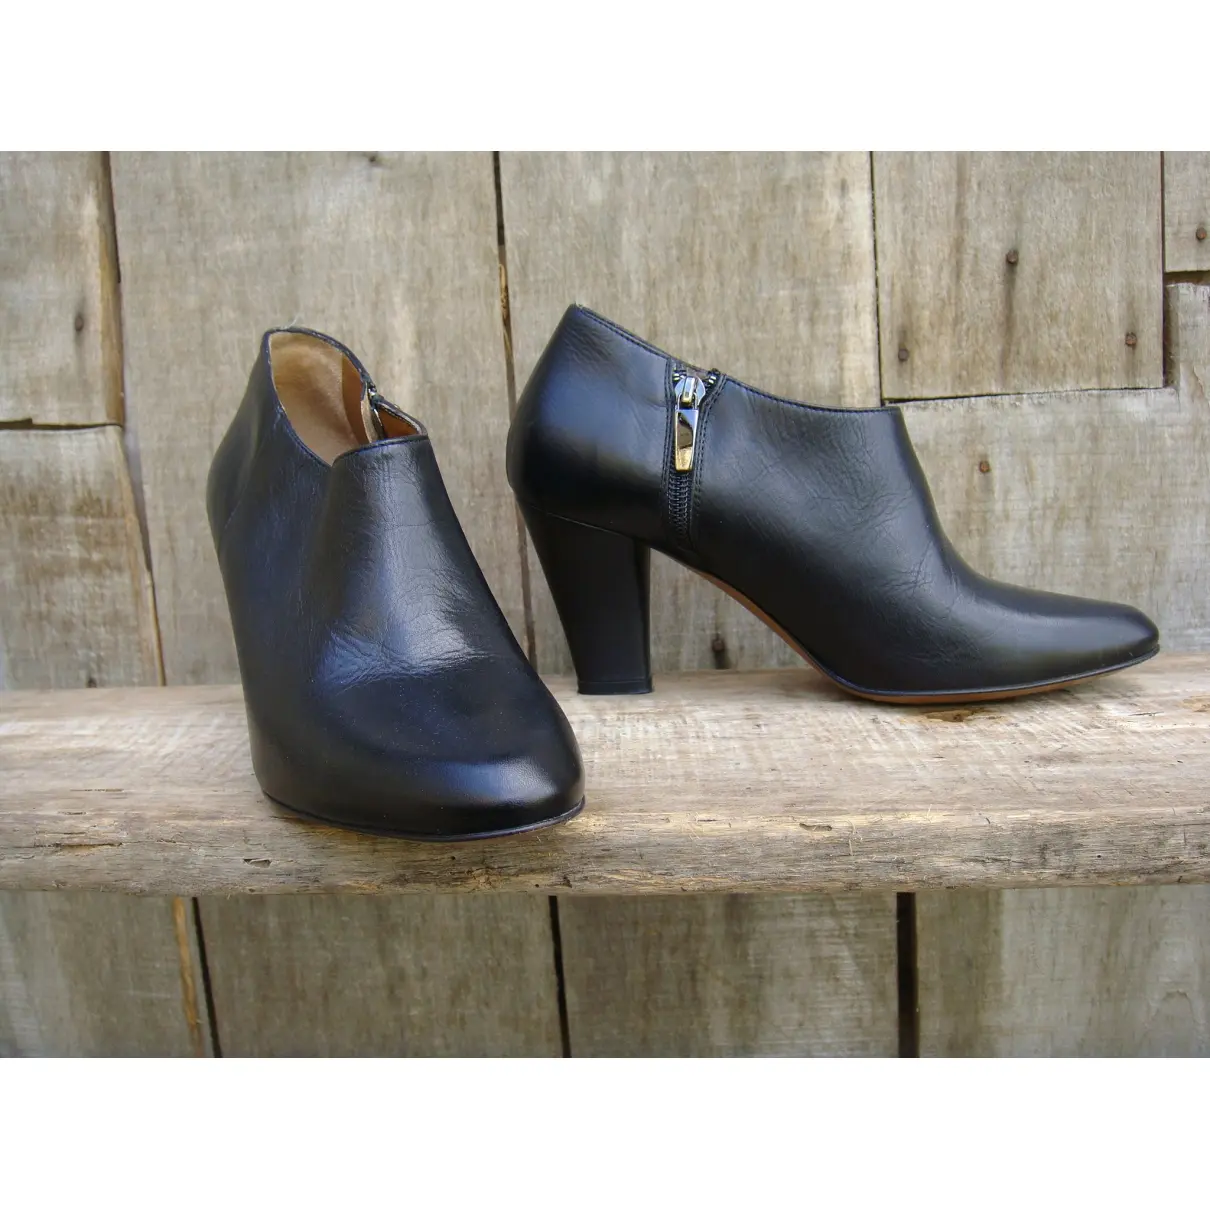 Hobbs Leather ankle boots for sale